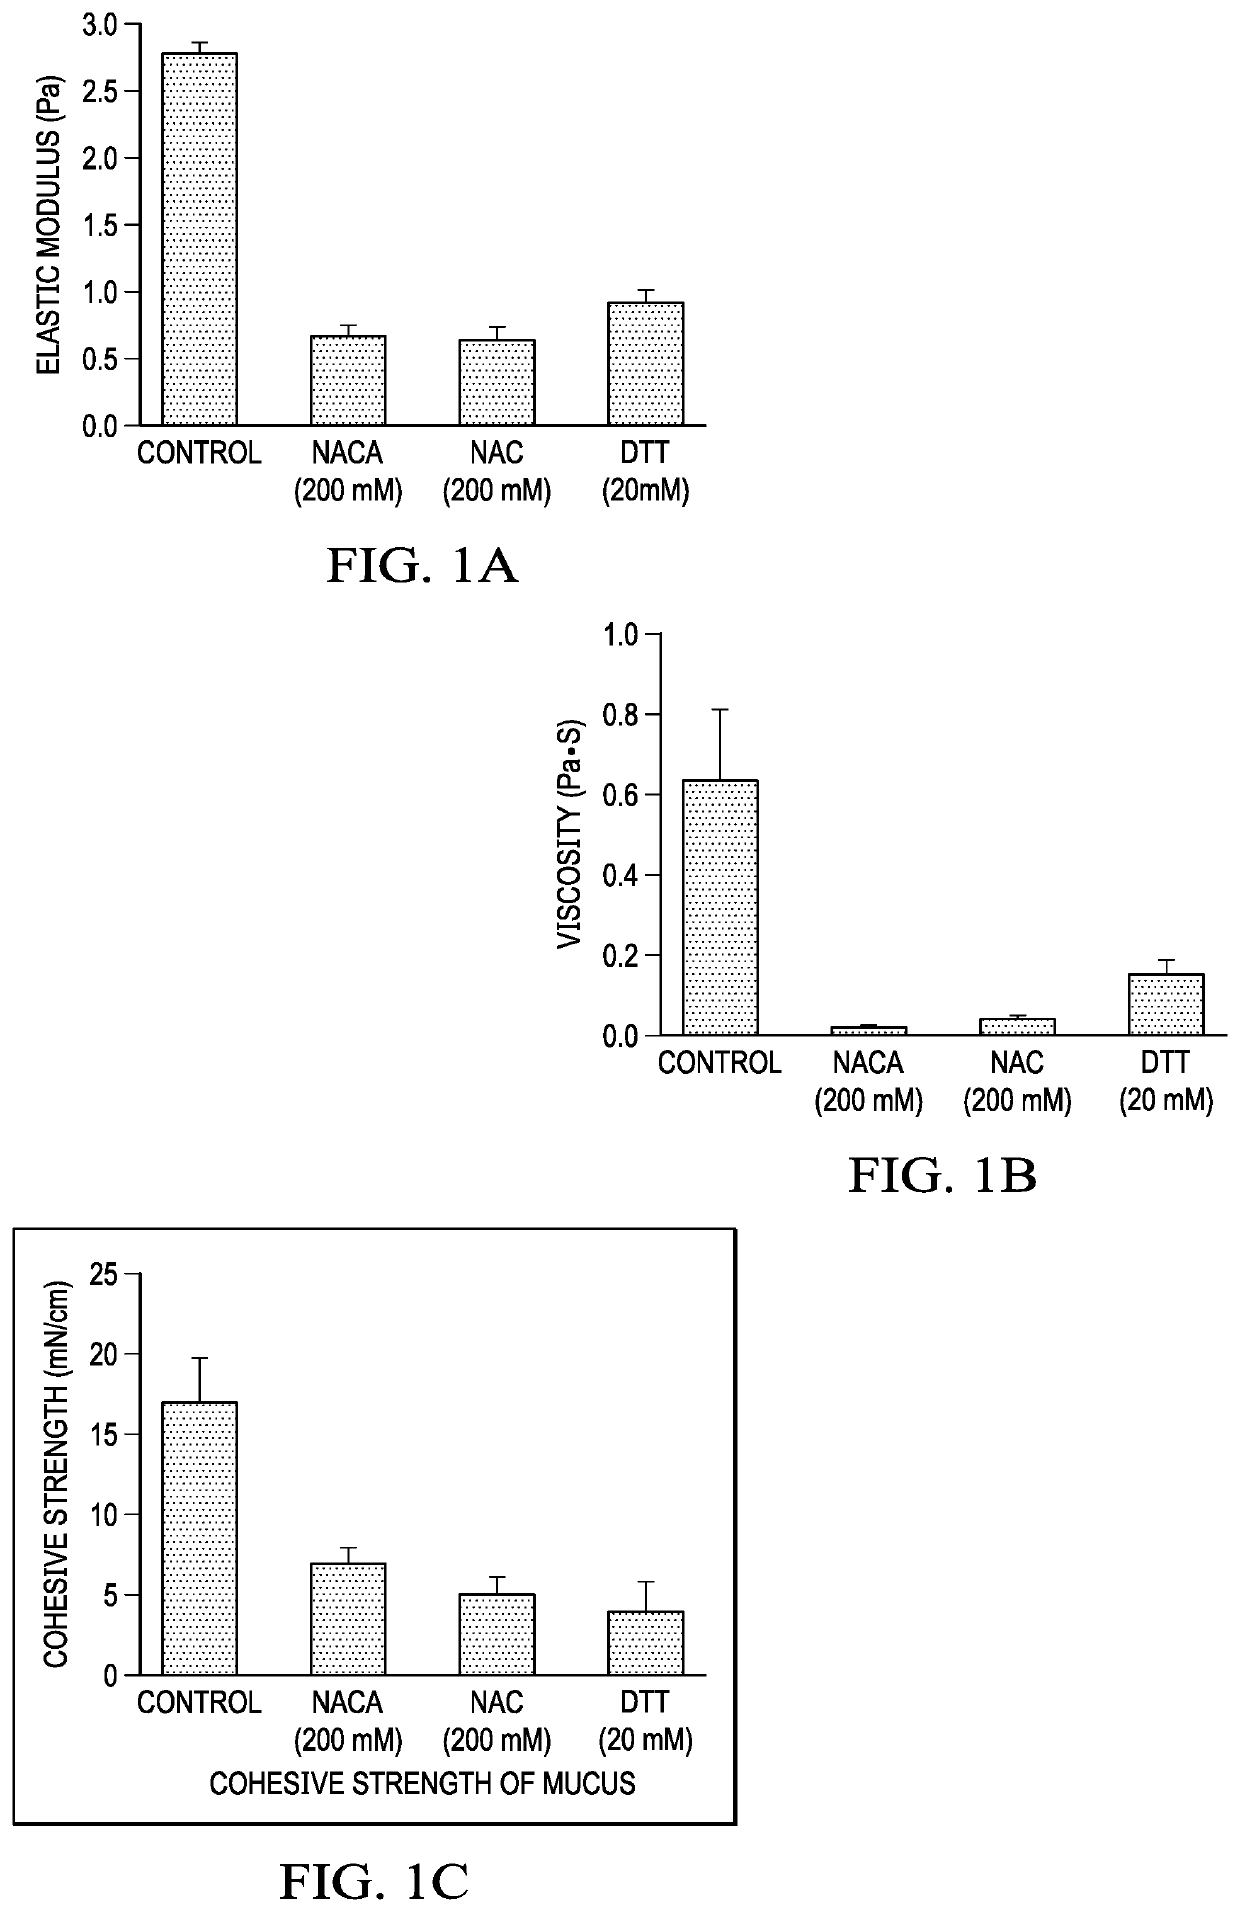 N-Acetylcysteine Amide (NACA) and (2R,2R')-3,3' disulfanediyl BIS(2-Acetamidopropanamide) (DINACA) for the Prevention and Treatment of Radiation Pneumonitis and Treatment of Pulmonary Function in Cystic Fibrosis